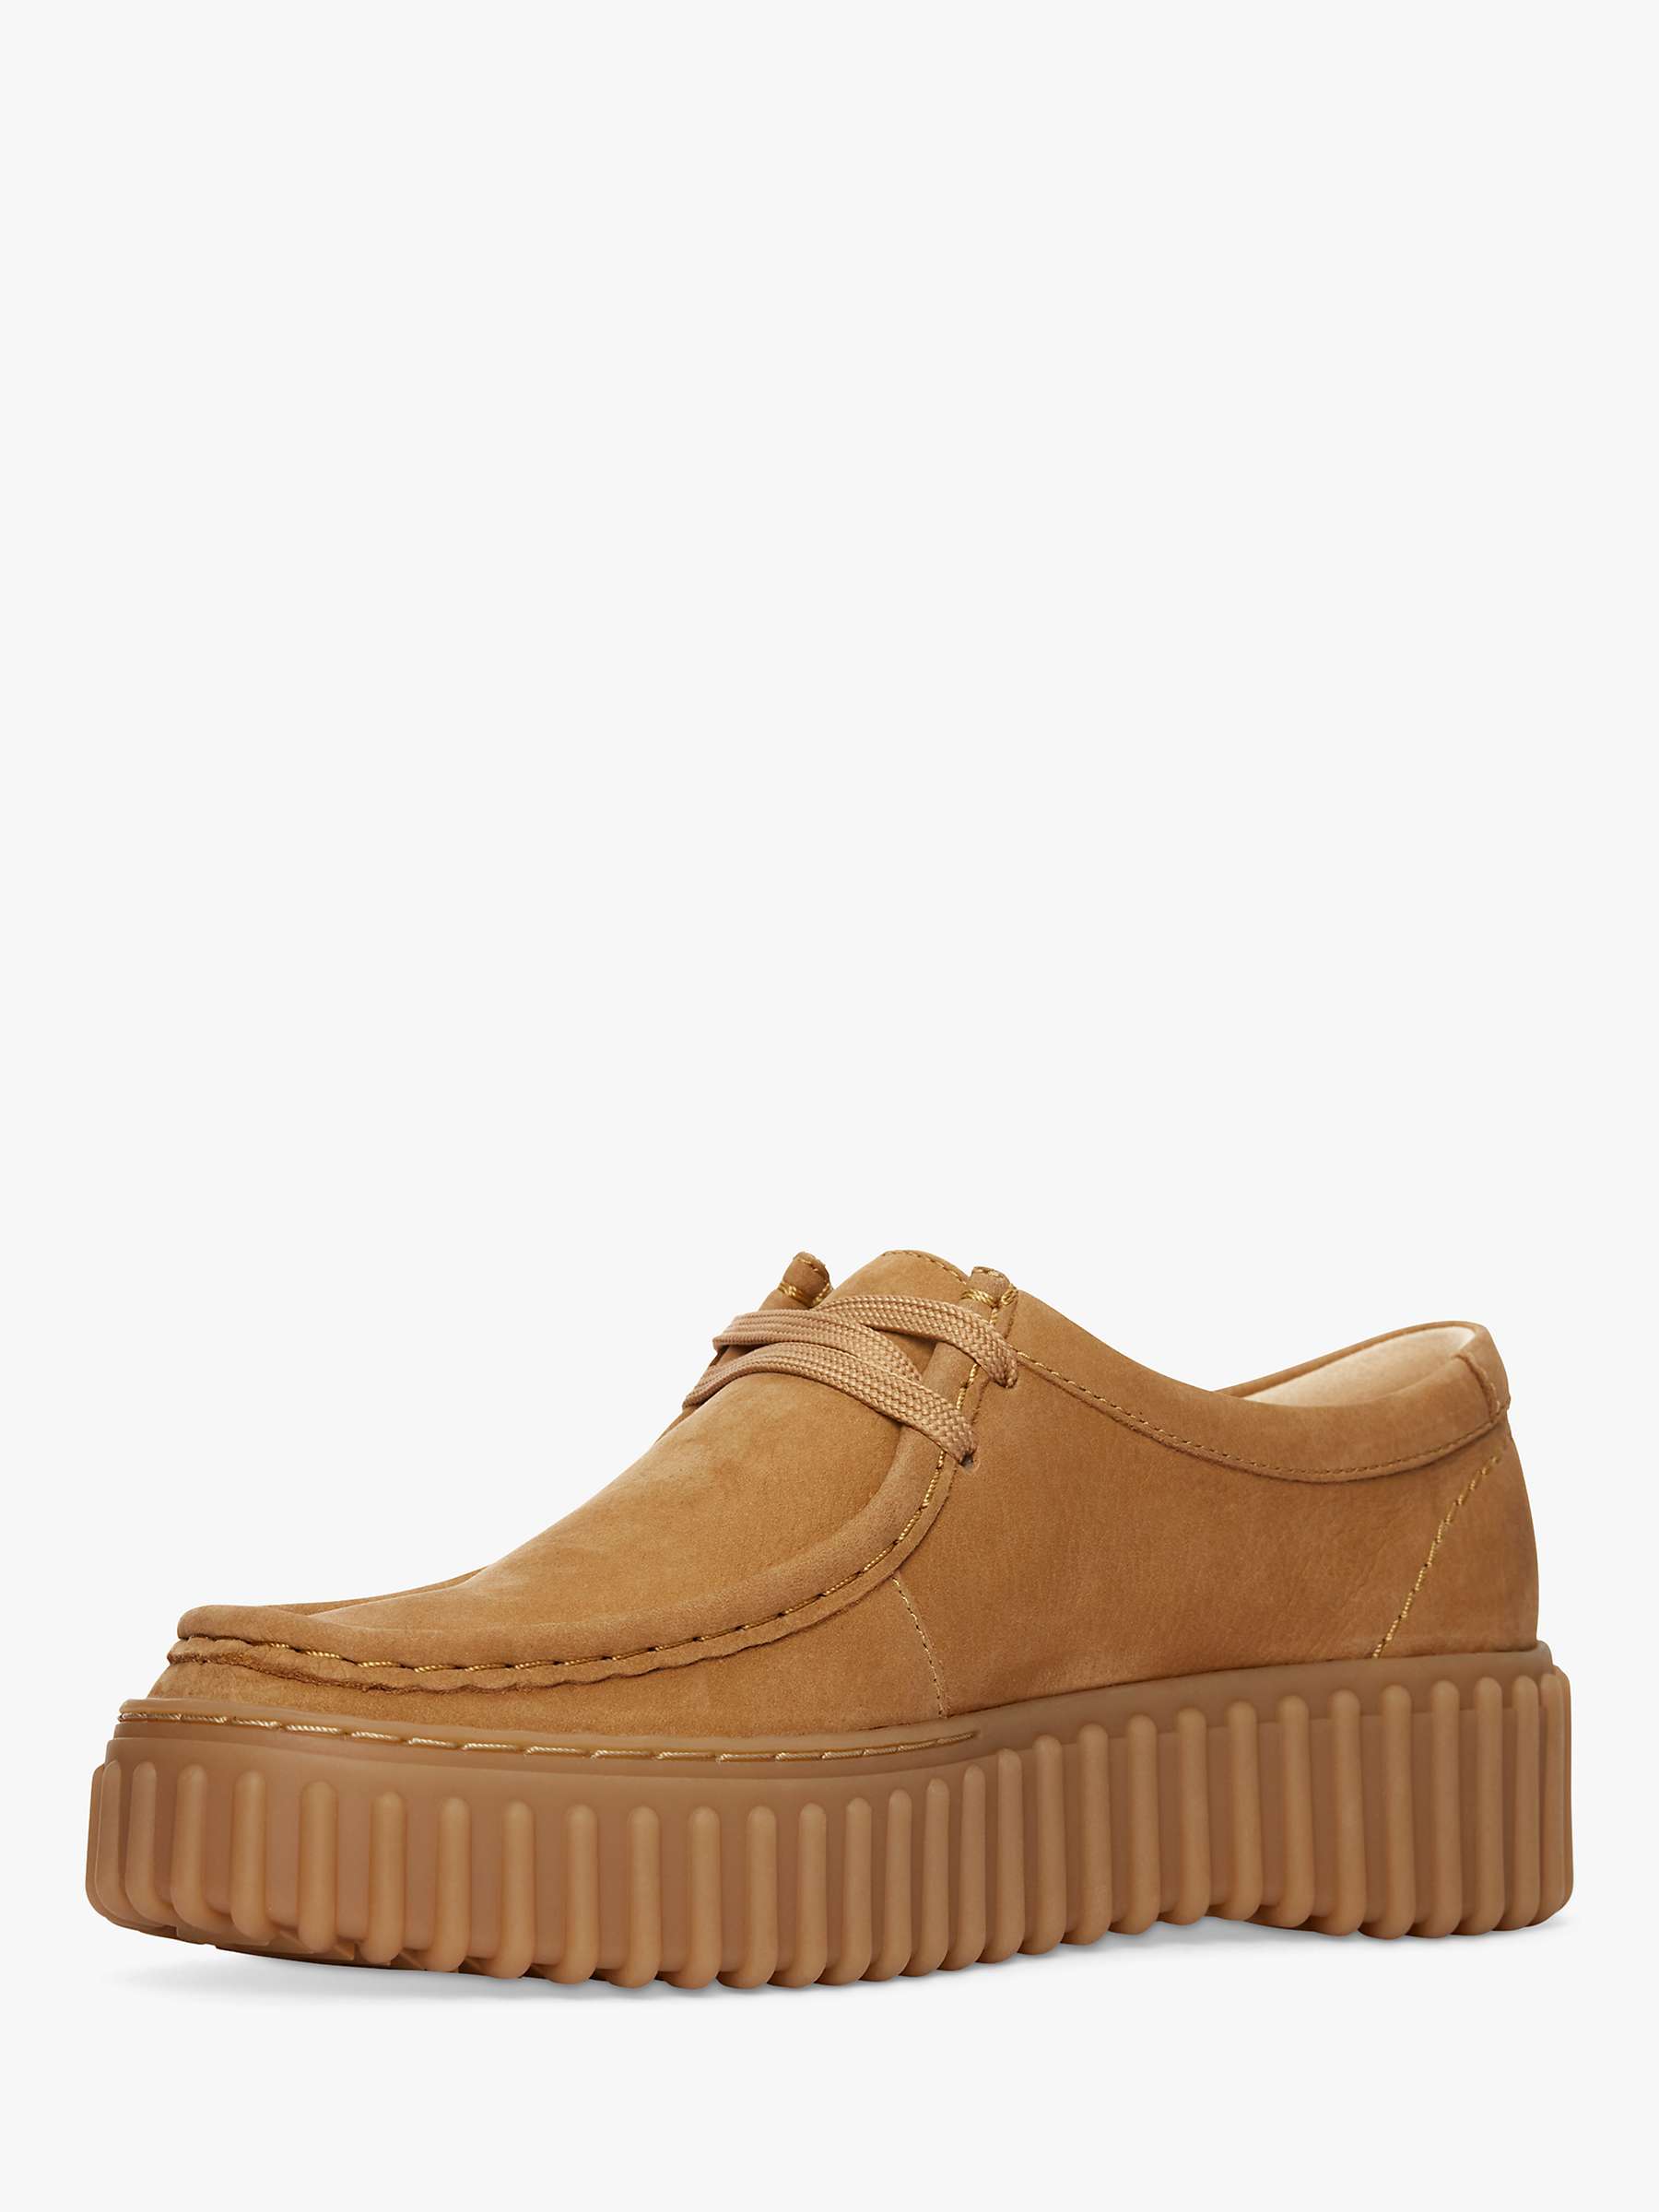 Buy Clarks Torhill Bee Suede Shoes Online at johnlewis.com